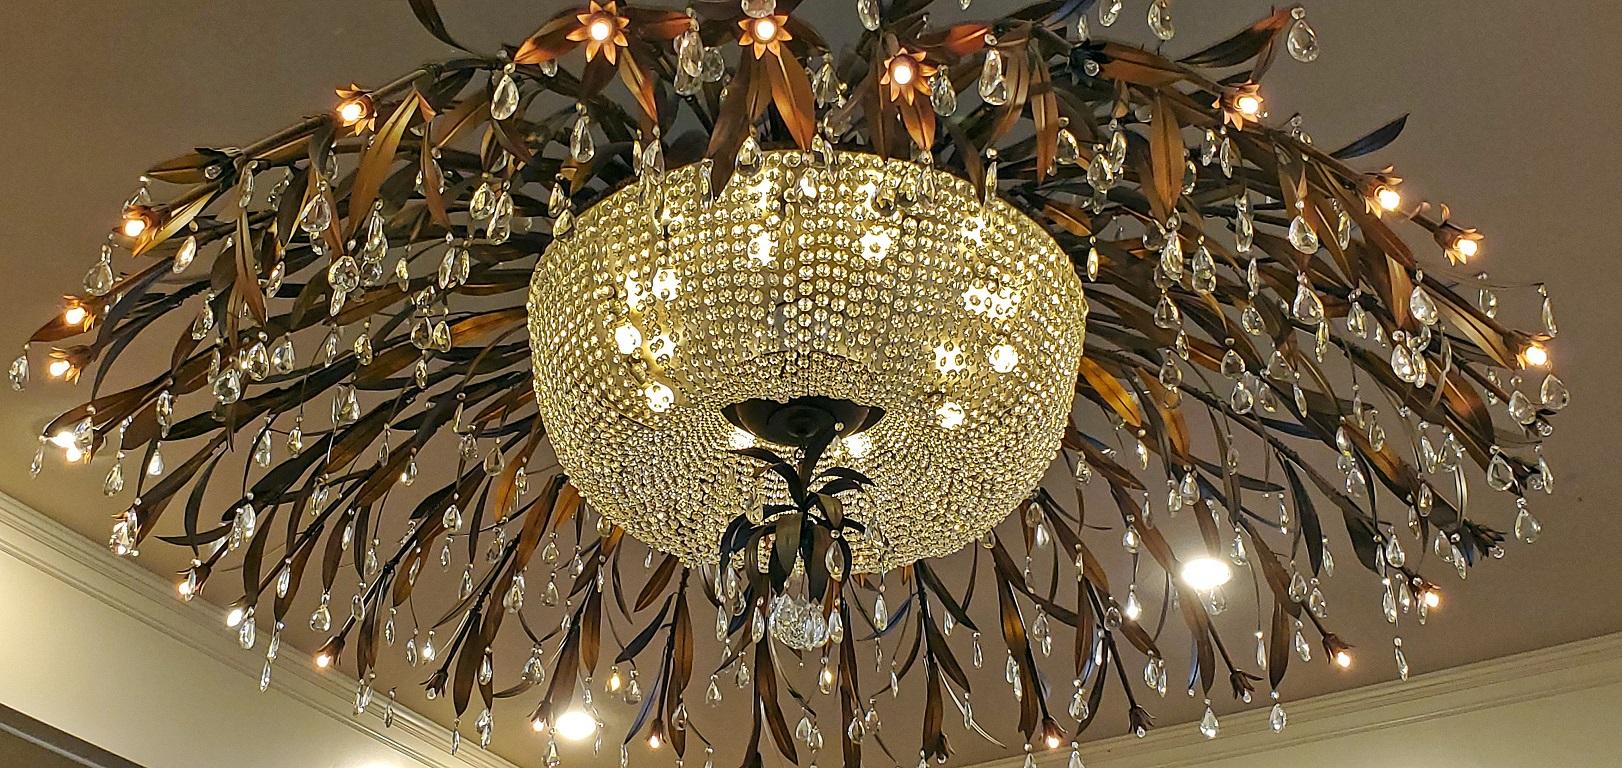 Cast Monumental Bronze and Floral Crystal Chandelier with Provenance